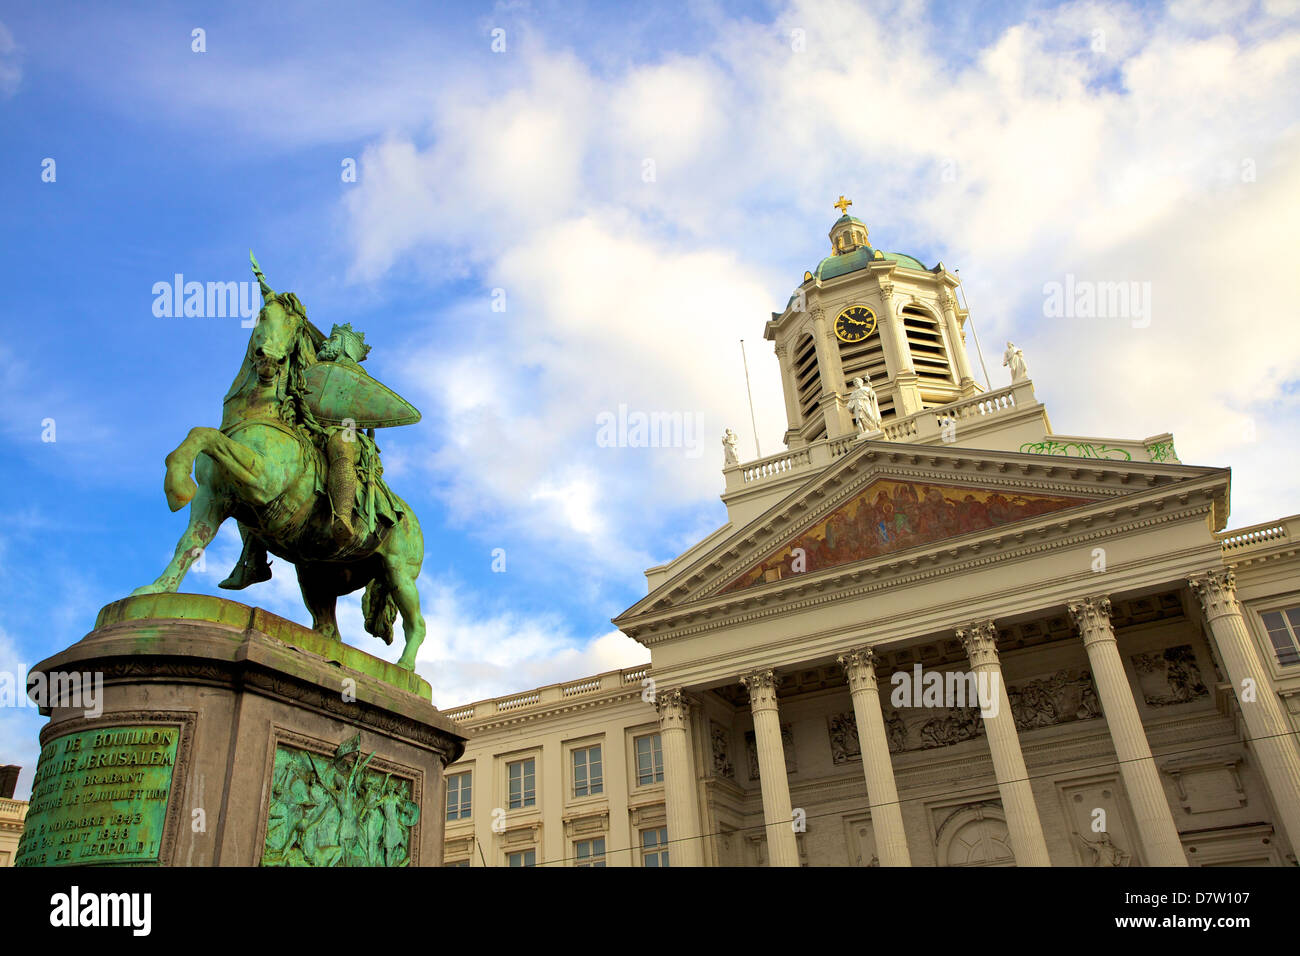 Statue of Godfrey of Bouillon, Place Royale, Brussels, Belgium Stock Photo